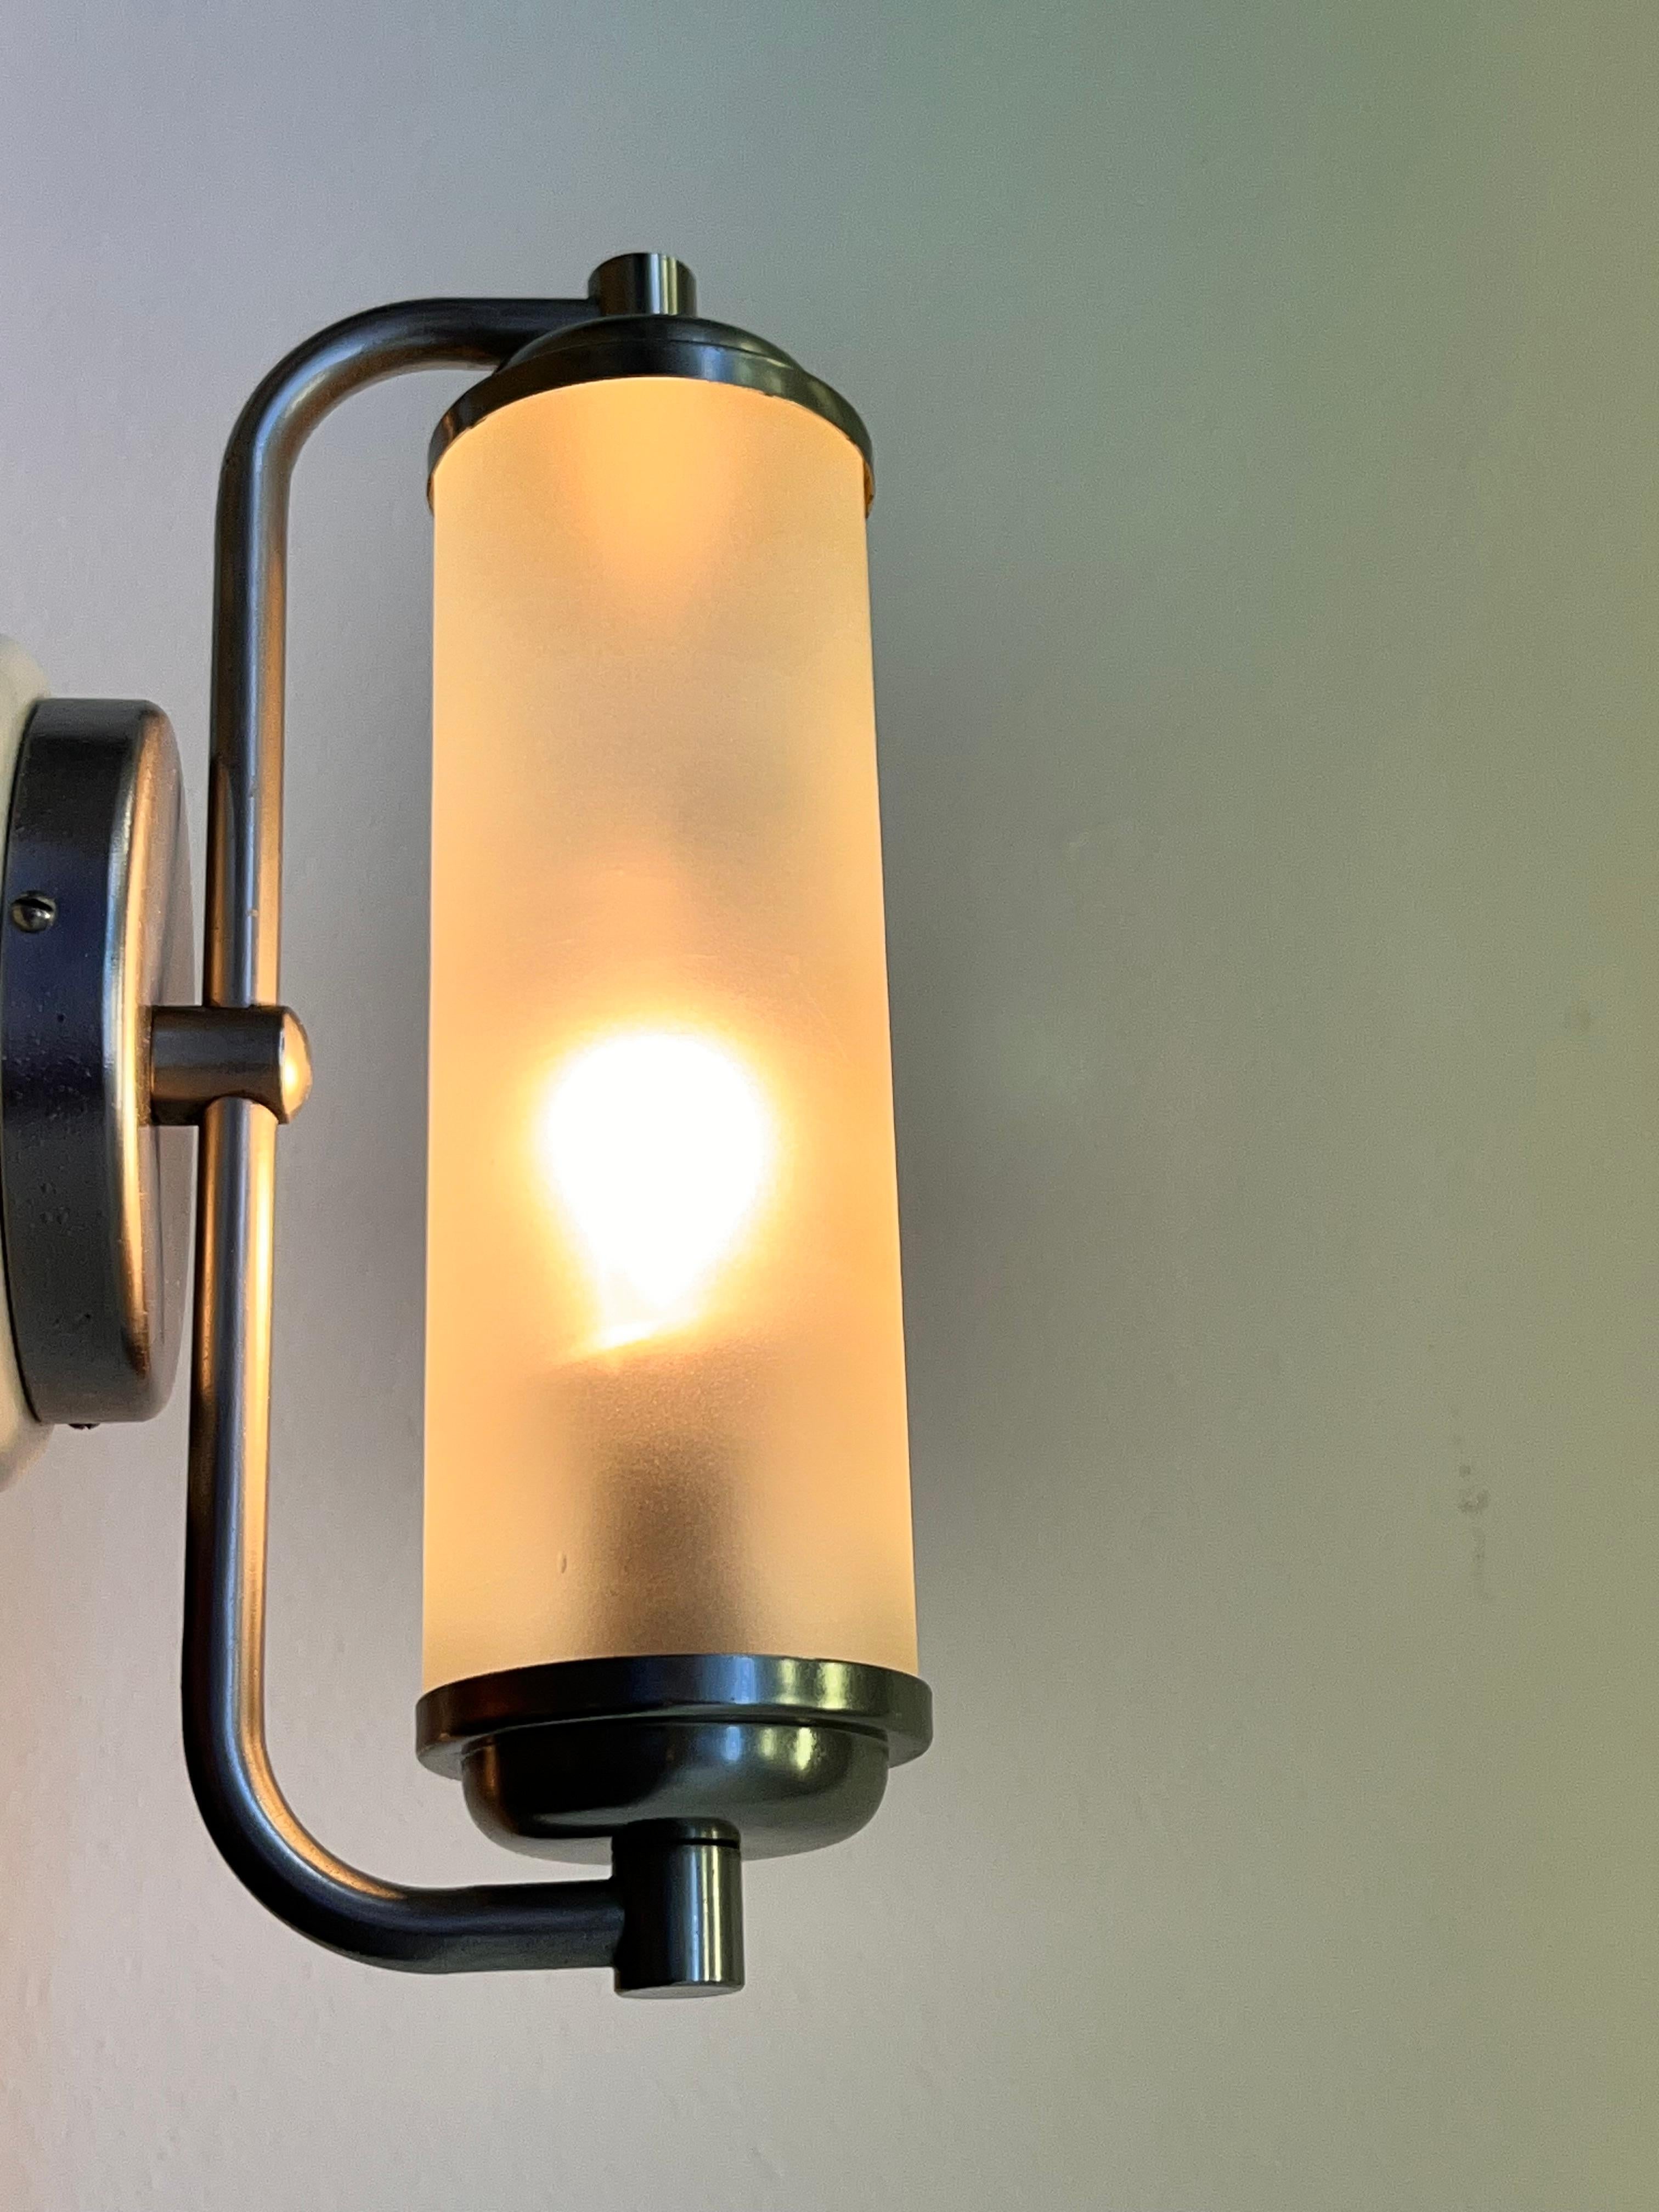 Set of 3 Bauhaus Wall Lampa, 1930s - Czechoslovakia In Good Condition For Sale In Praha, CZ